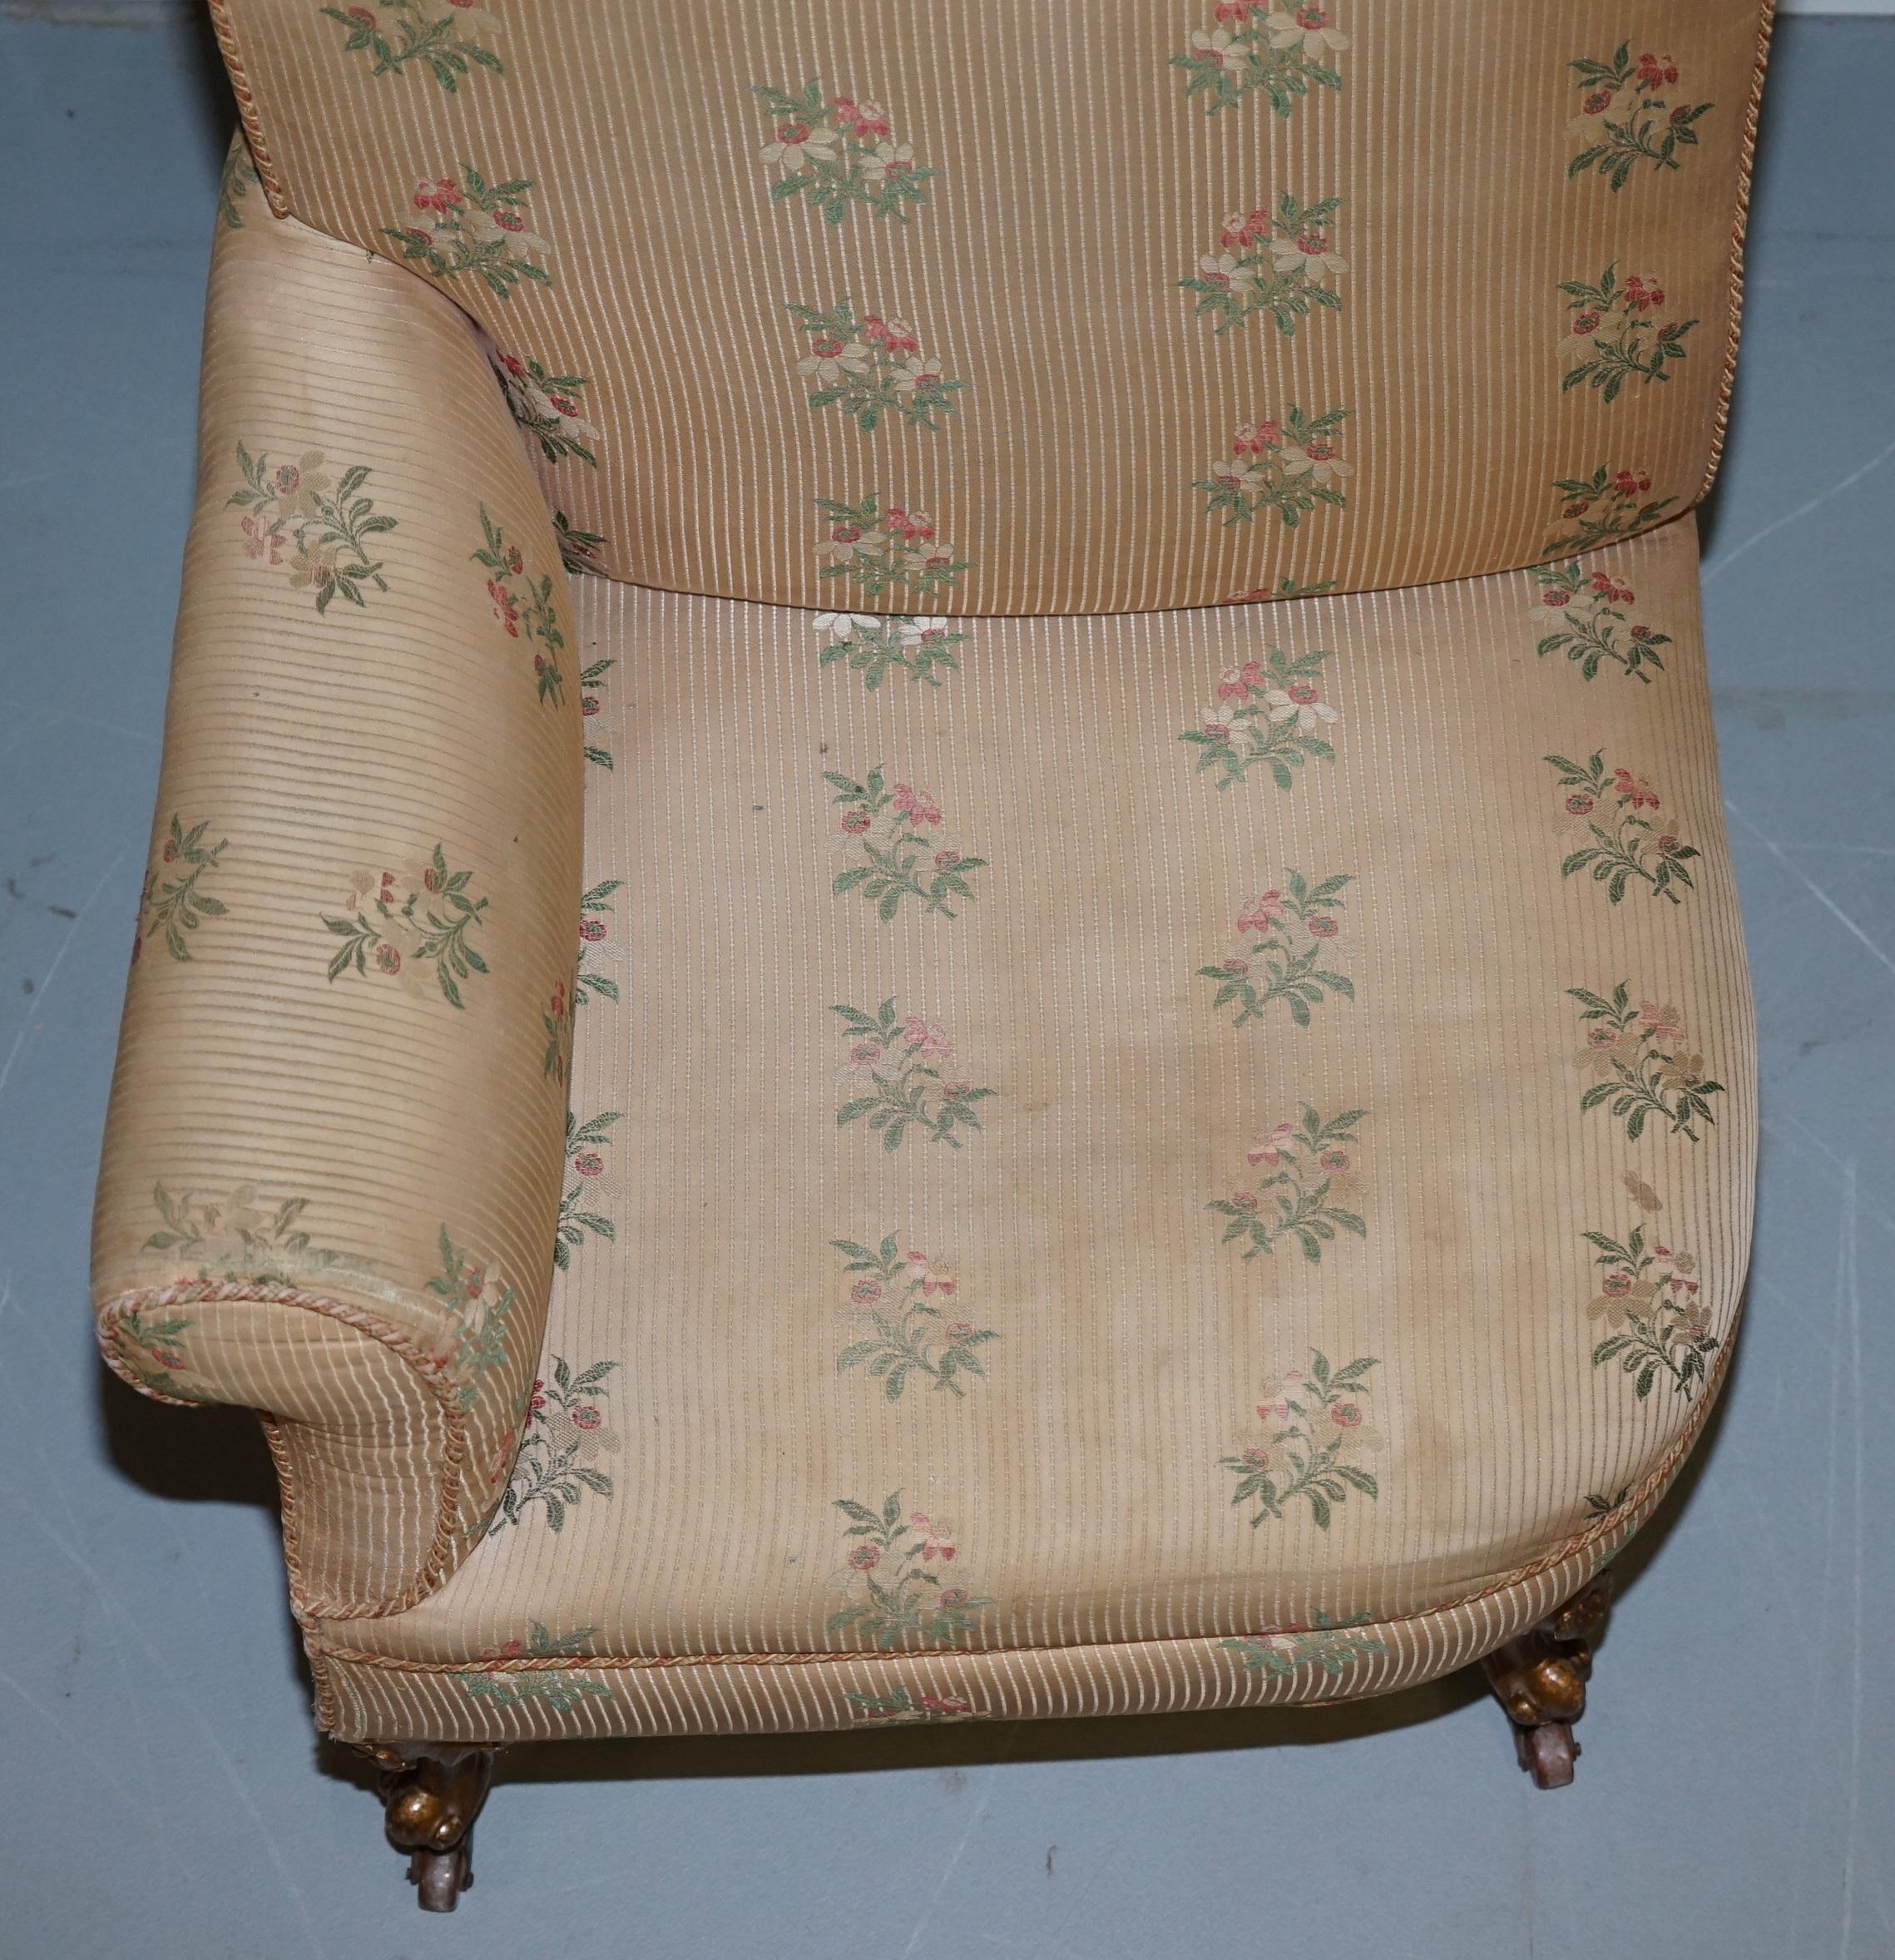 Upholstery Rare Pair of Giltwood Victorian Asymmetrical Armchairs Embroidered Bird Covers For Sale